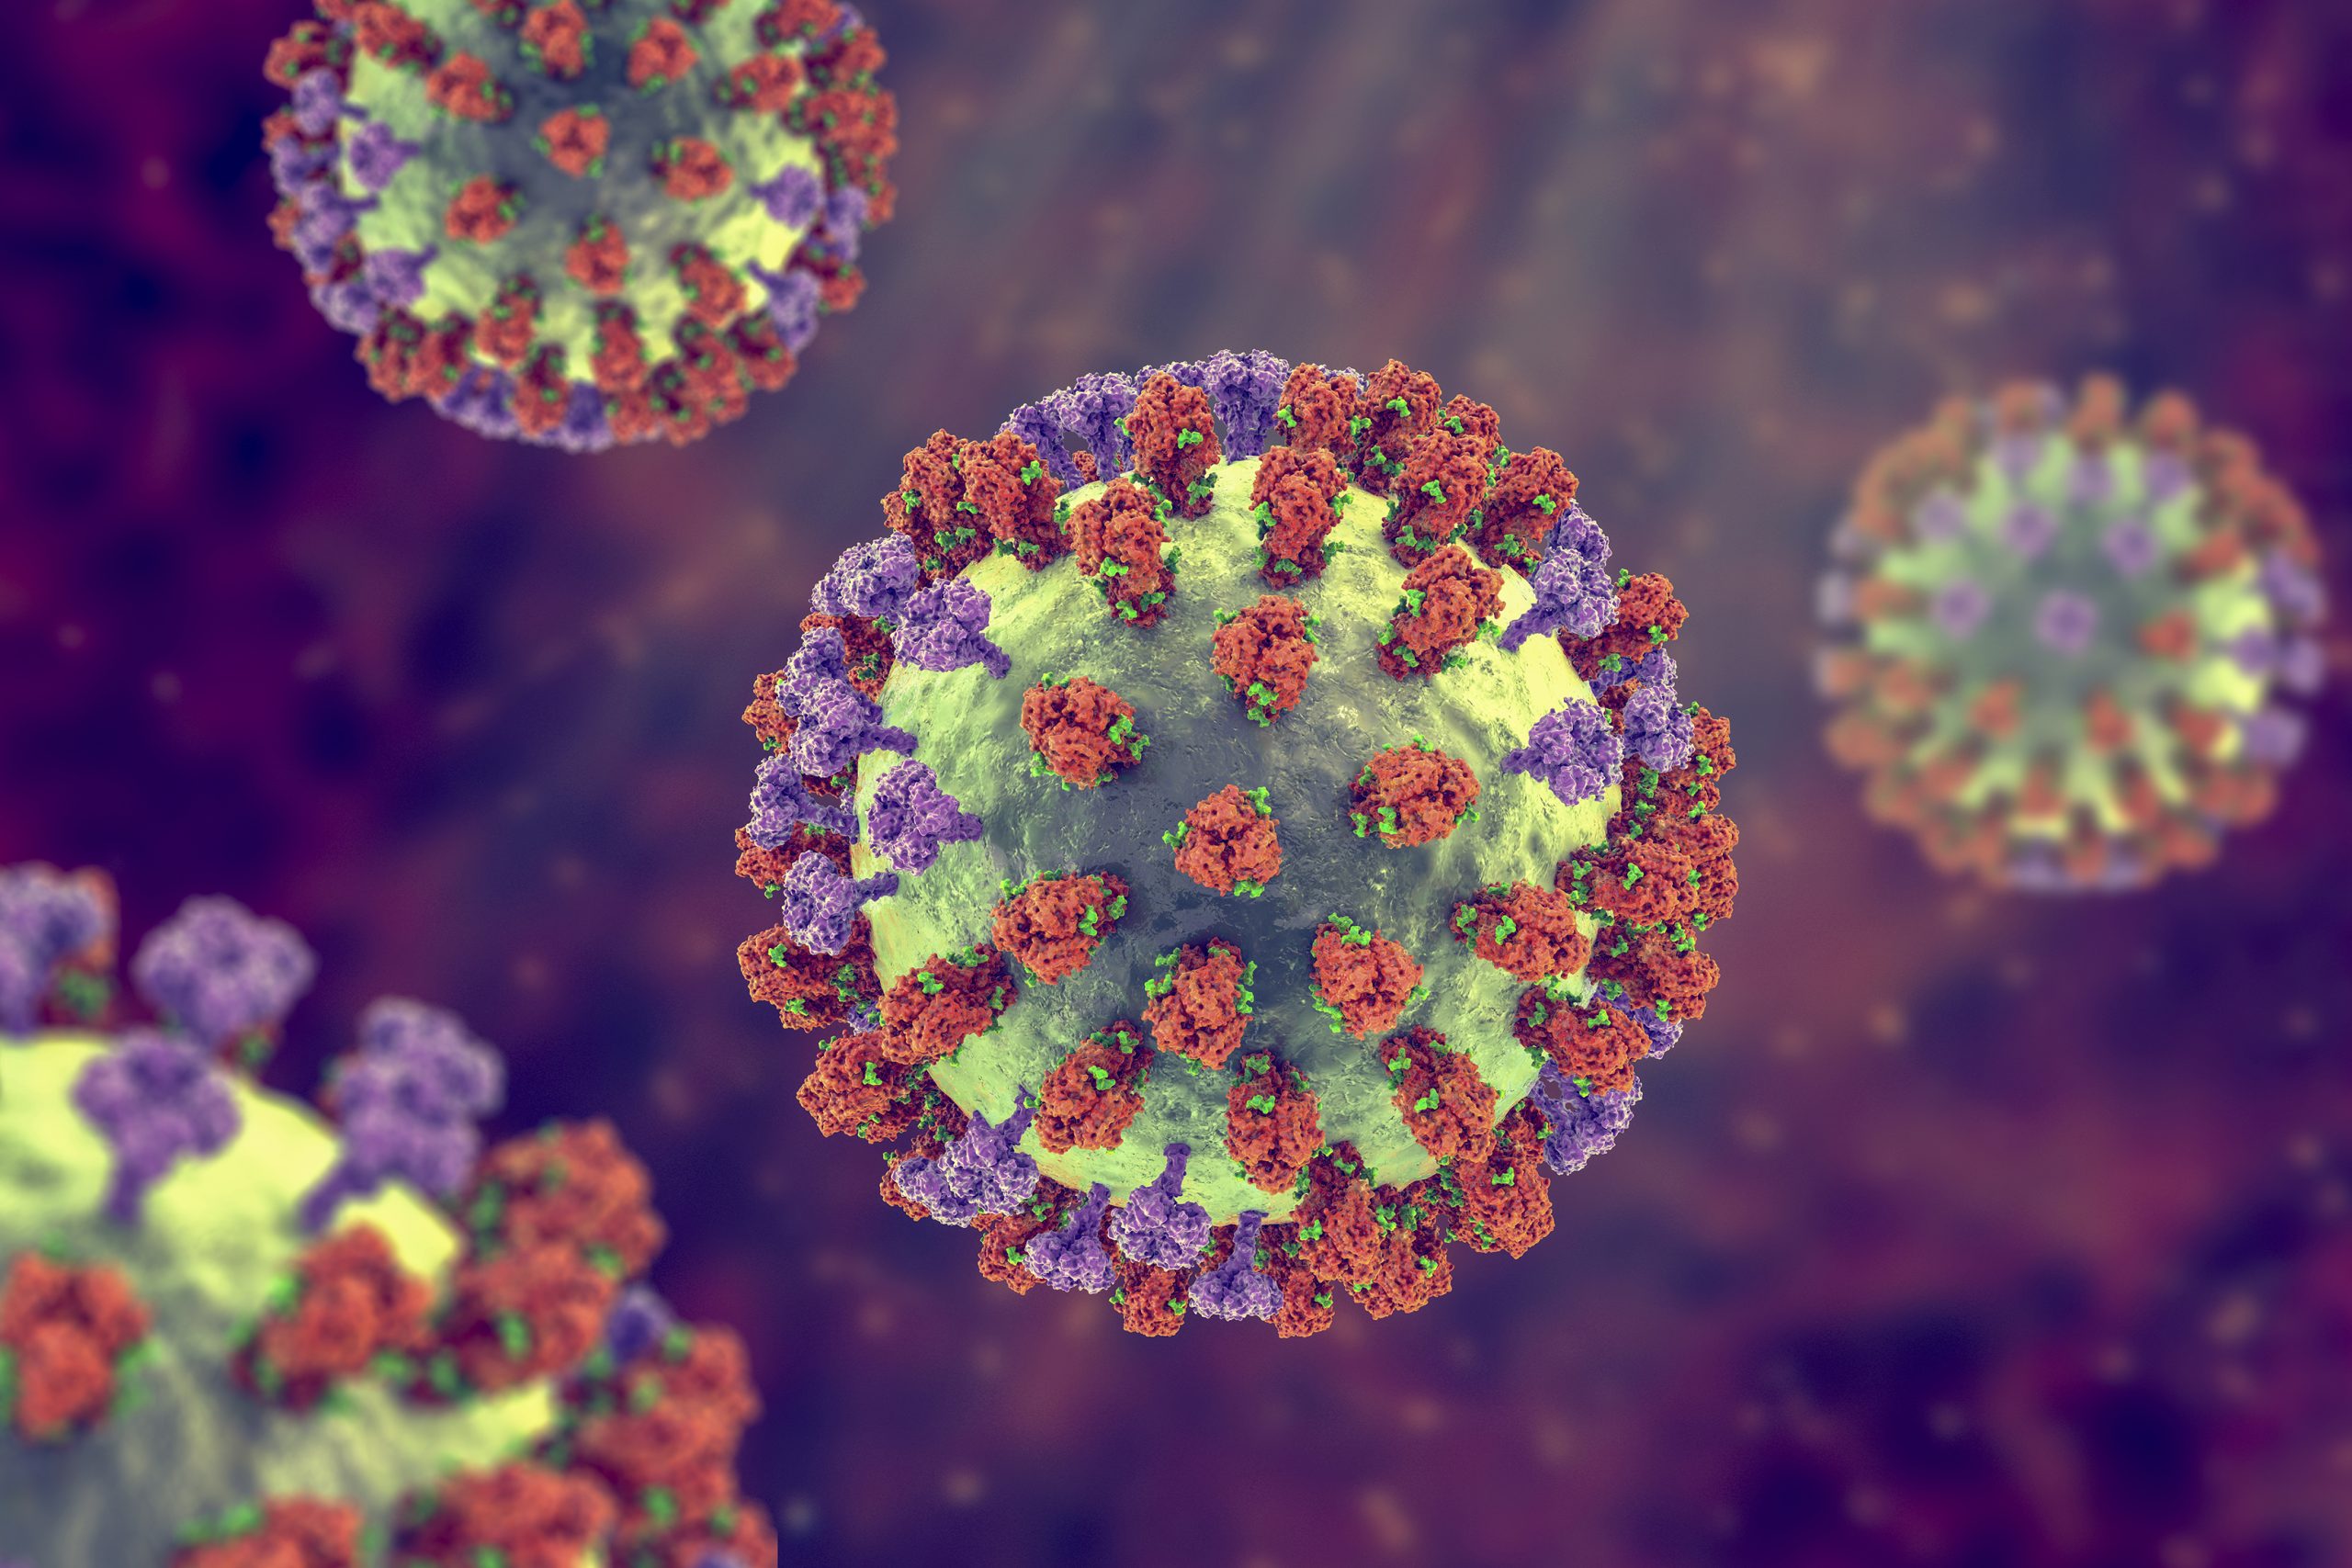 Multiple Flu Strains Neutralized by New Class of Antibodies